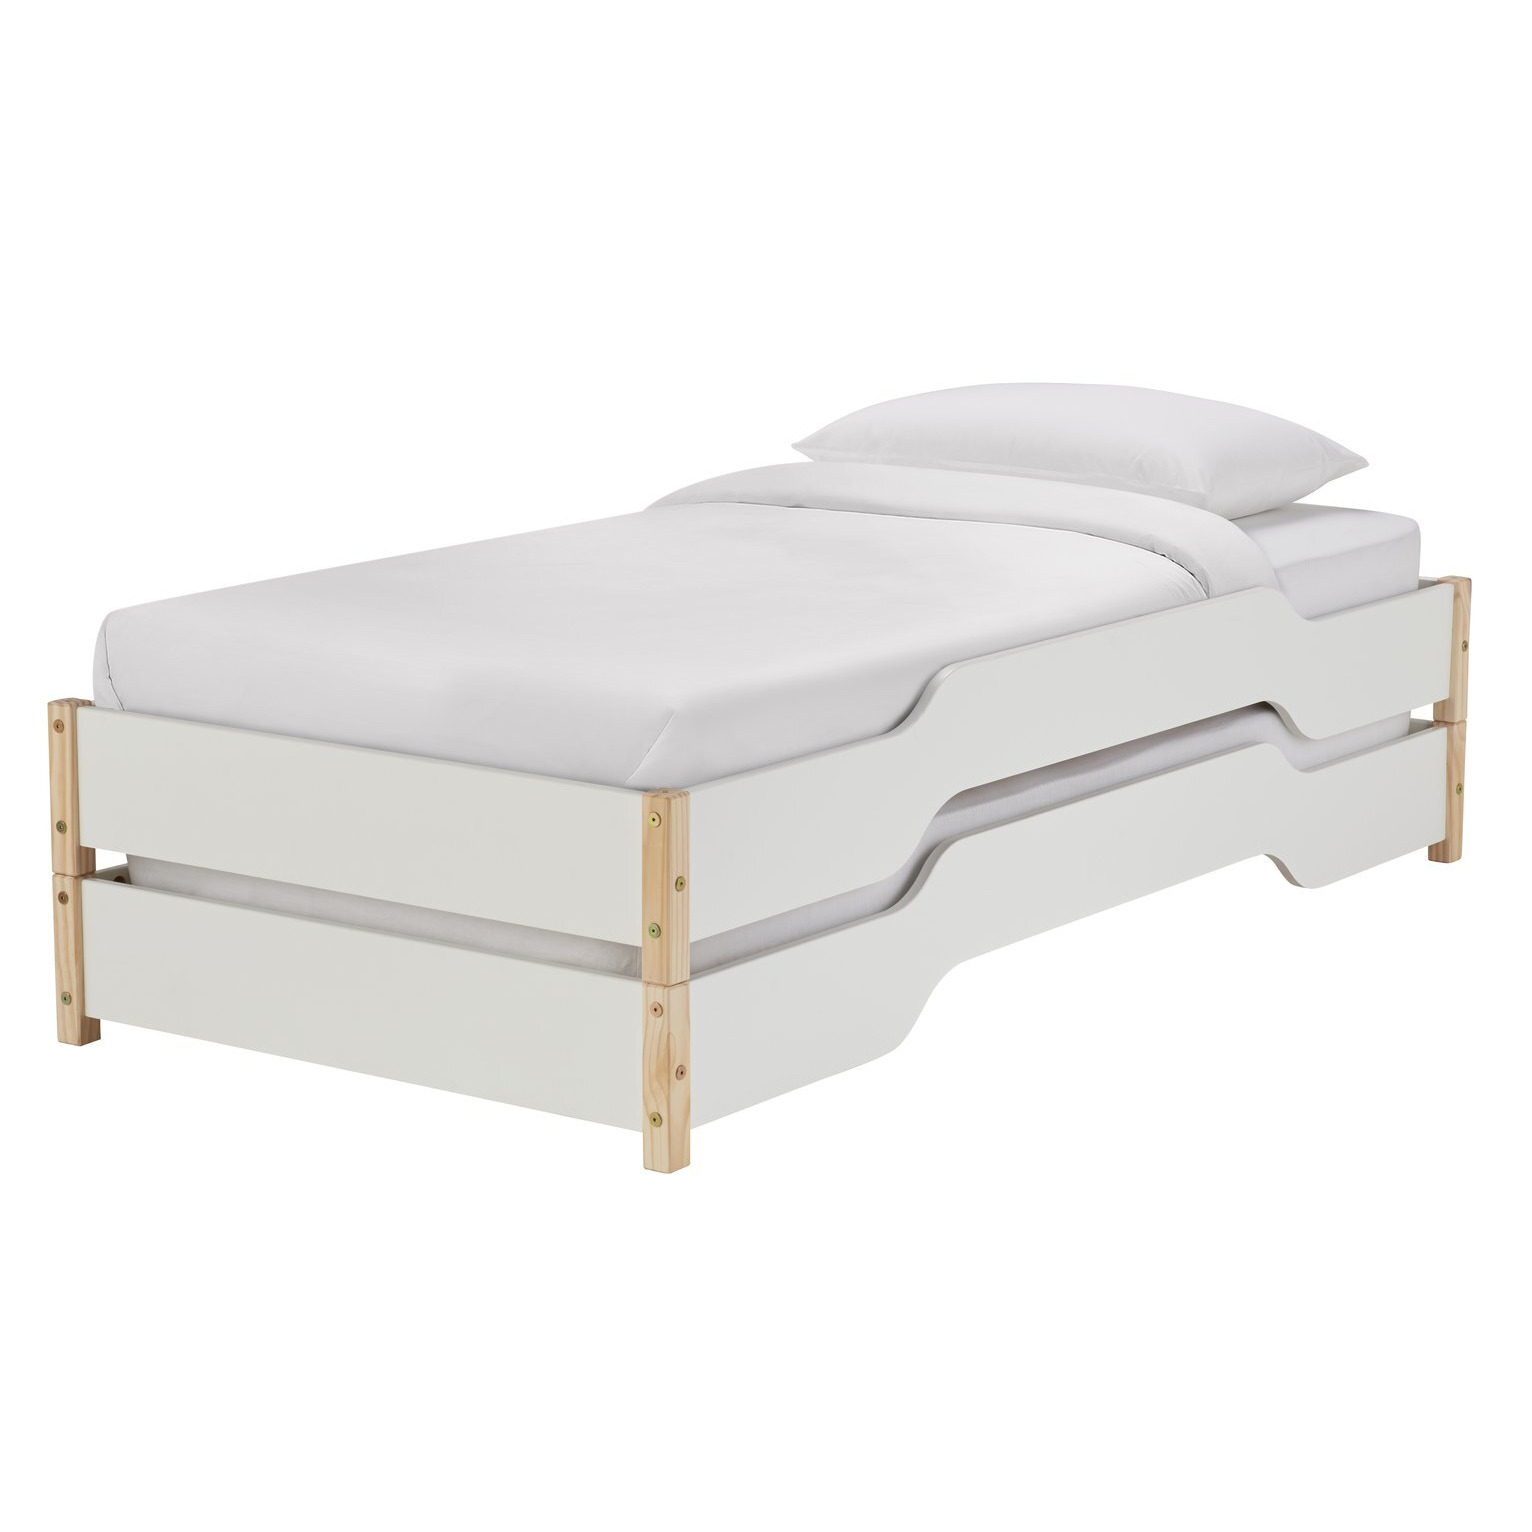 Habitat Hanna Stacking Guest Bed - Single - image 1